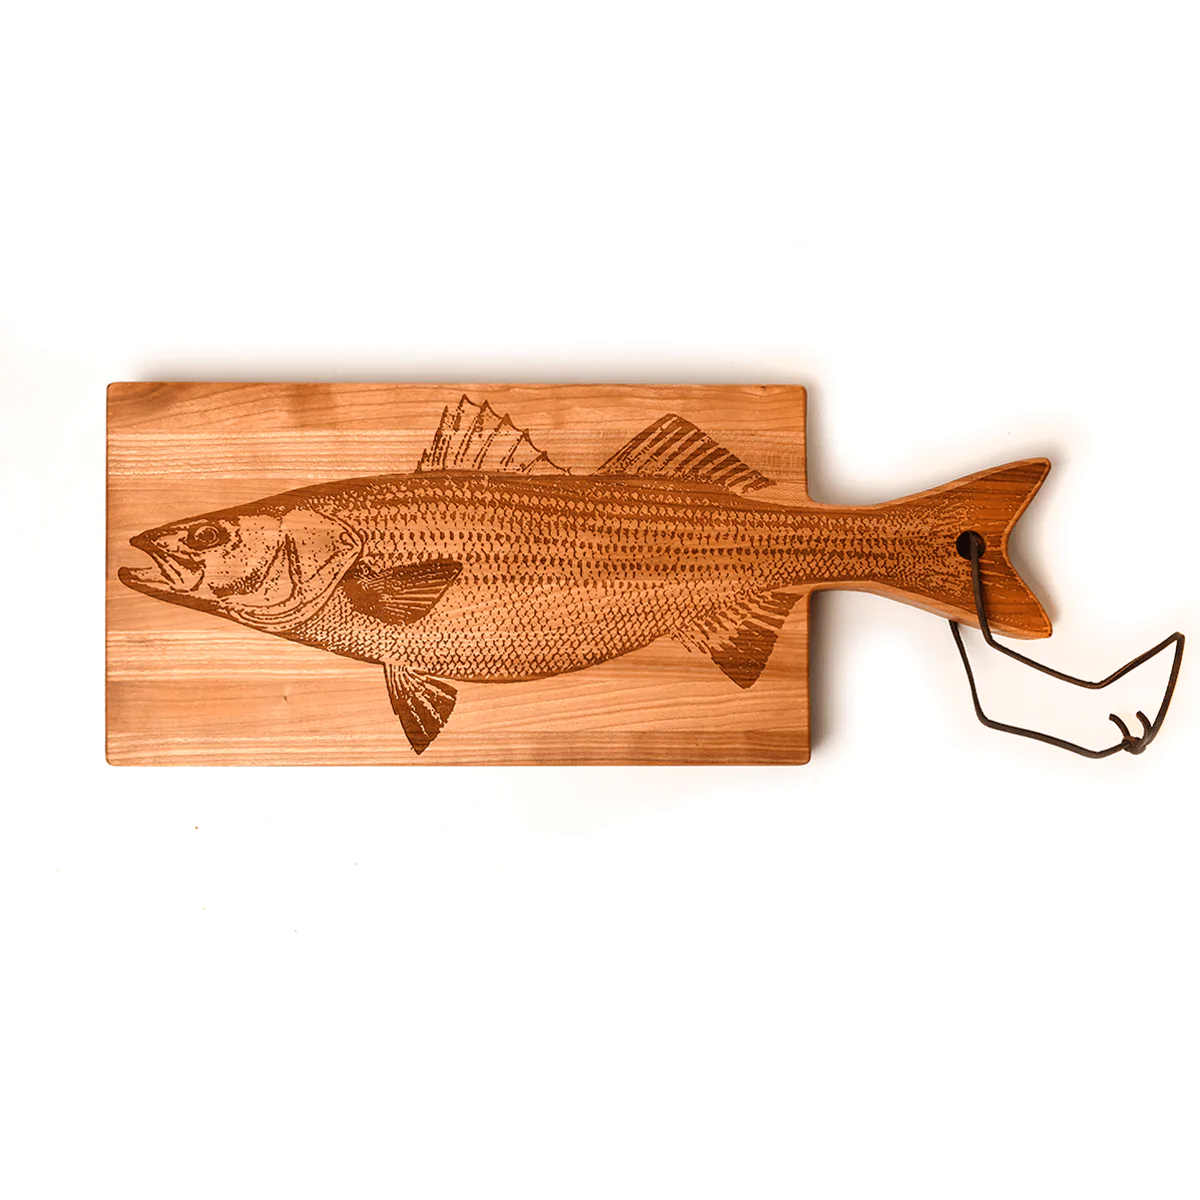 The rockfish cutting board from Words with Boards.